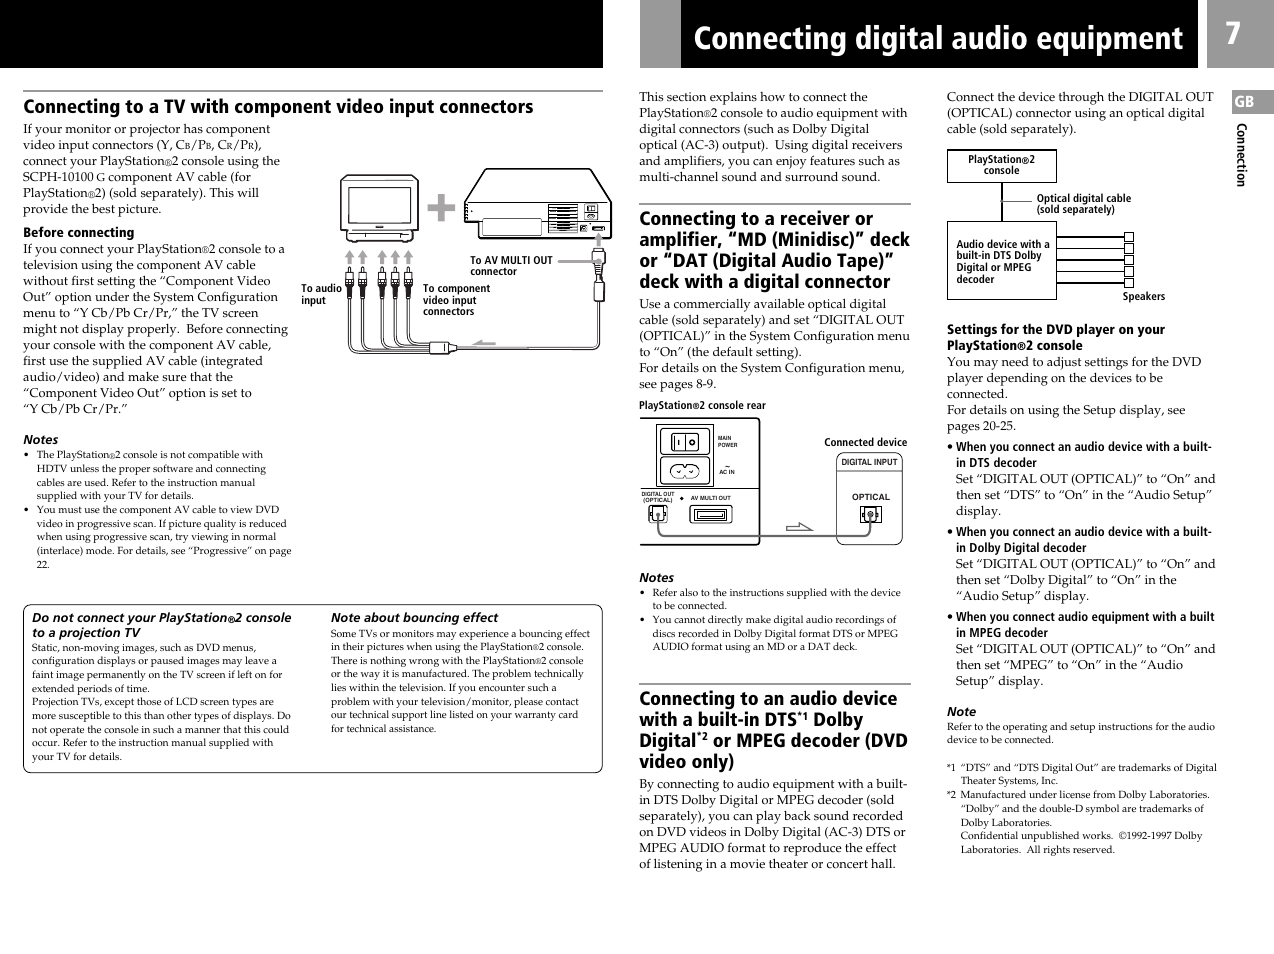 Connecting digital audio equipment, Connecting to an audio device with a built-in dts, Dolby digital | Or mpeg decoder (dvd video only) | Sony SCPH-50006 User Manual | Page 7 / 56